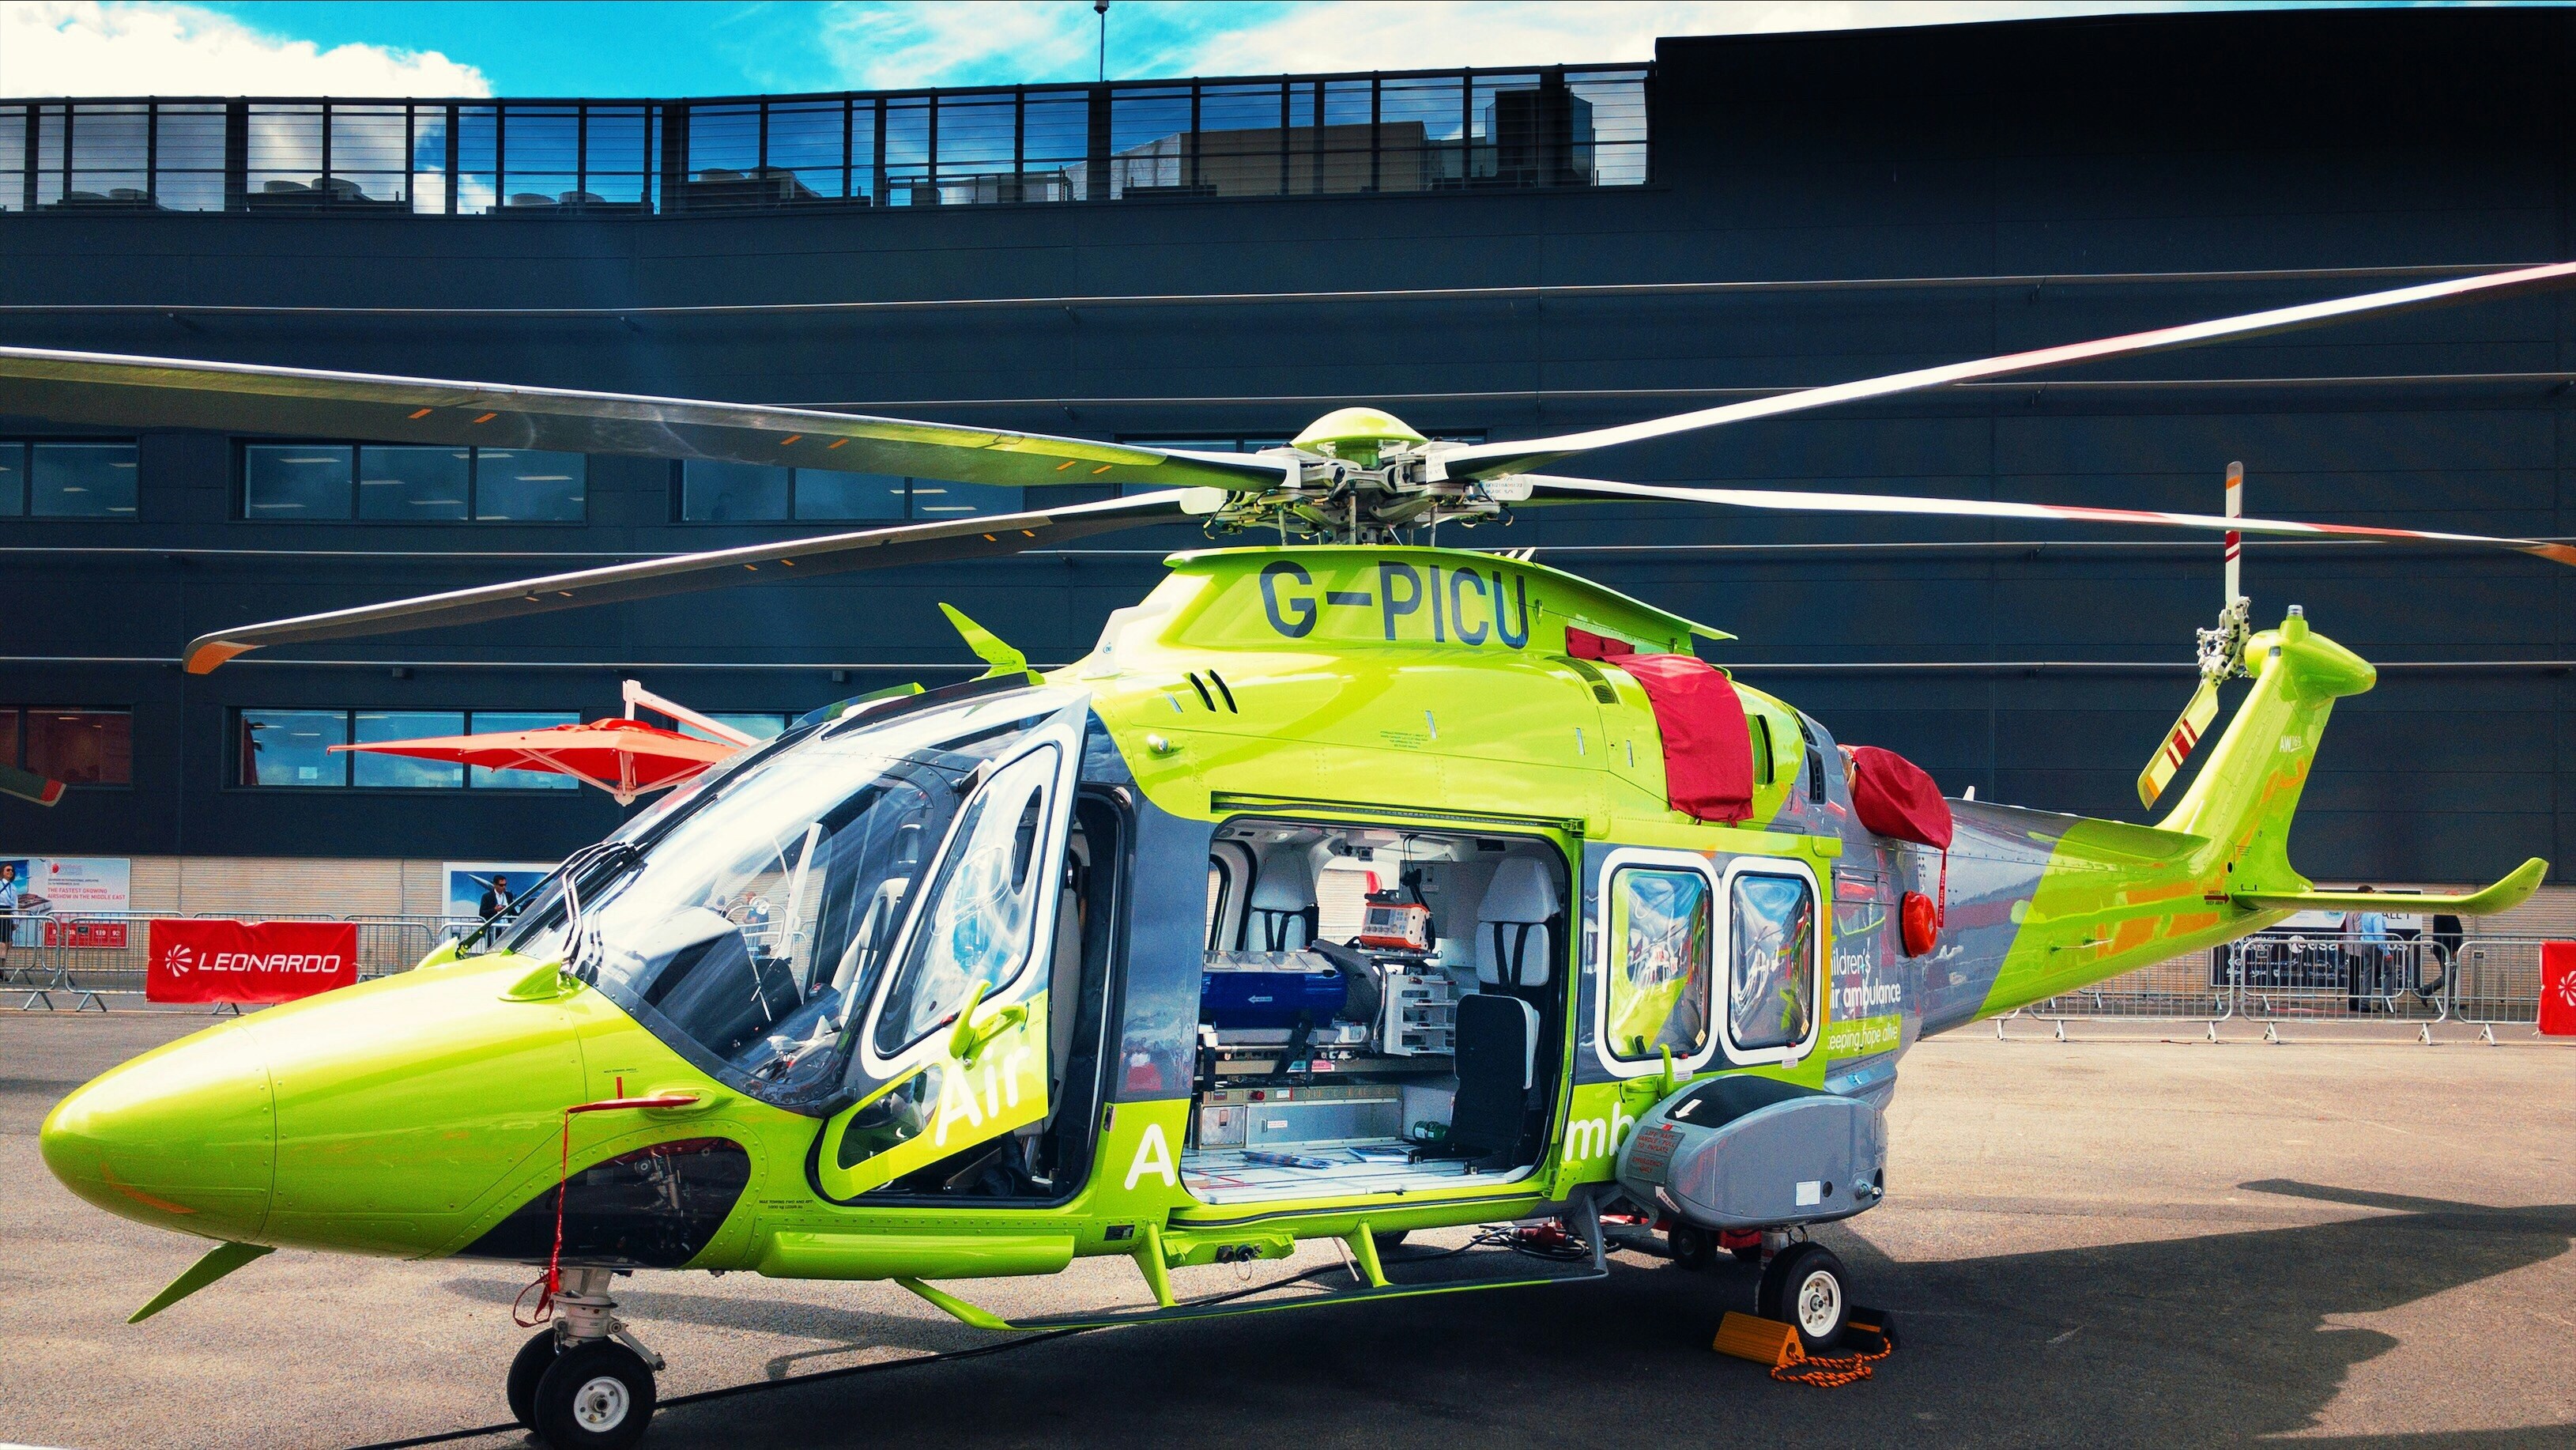 Air Ambulances provide medical care on board and the ability to lie down during flight.